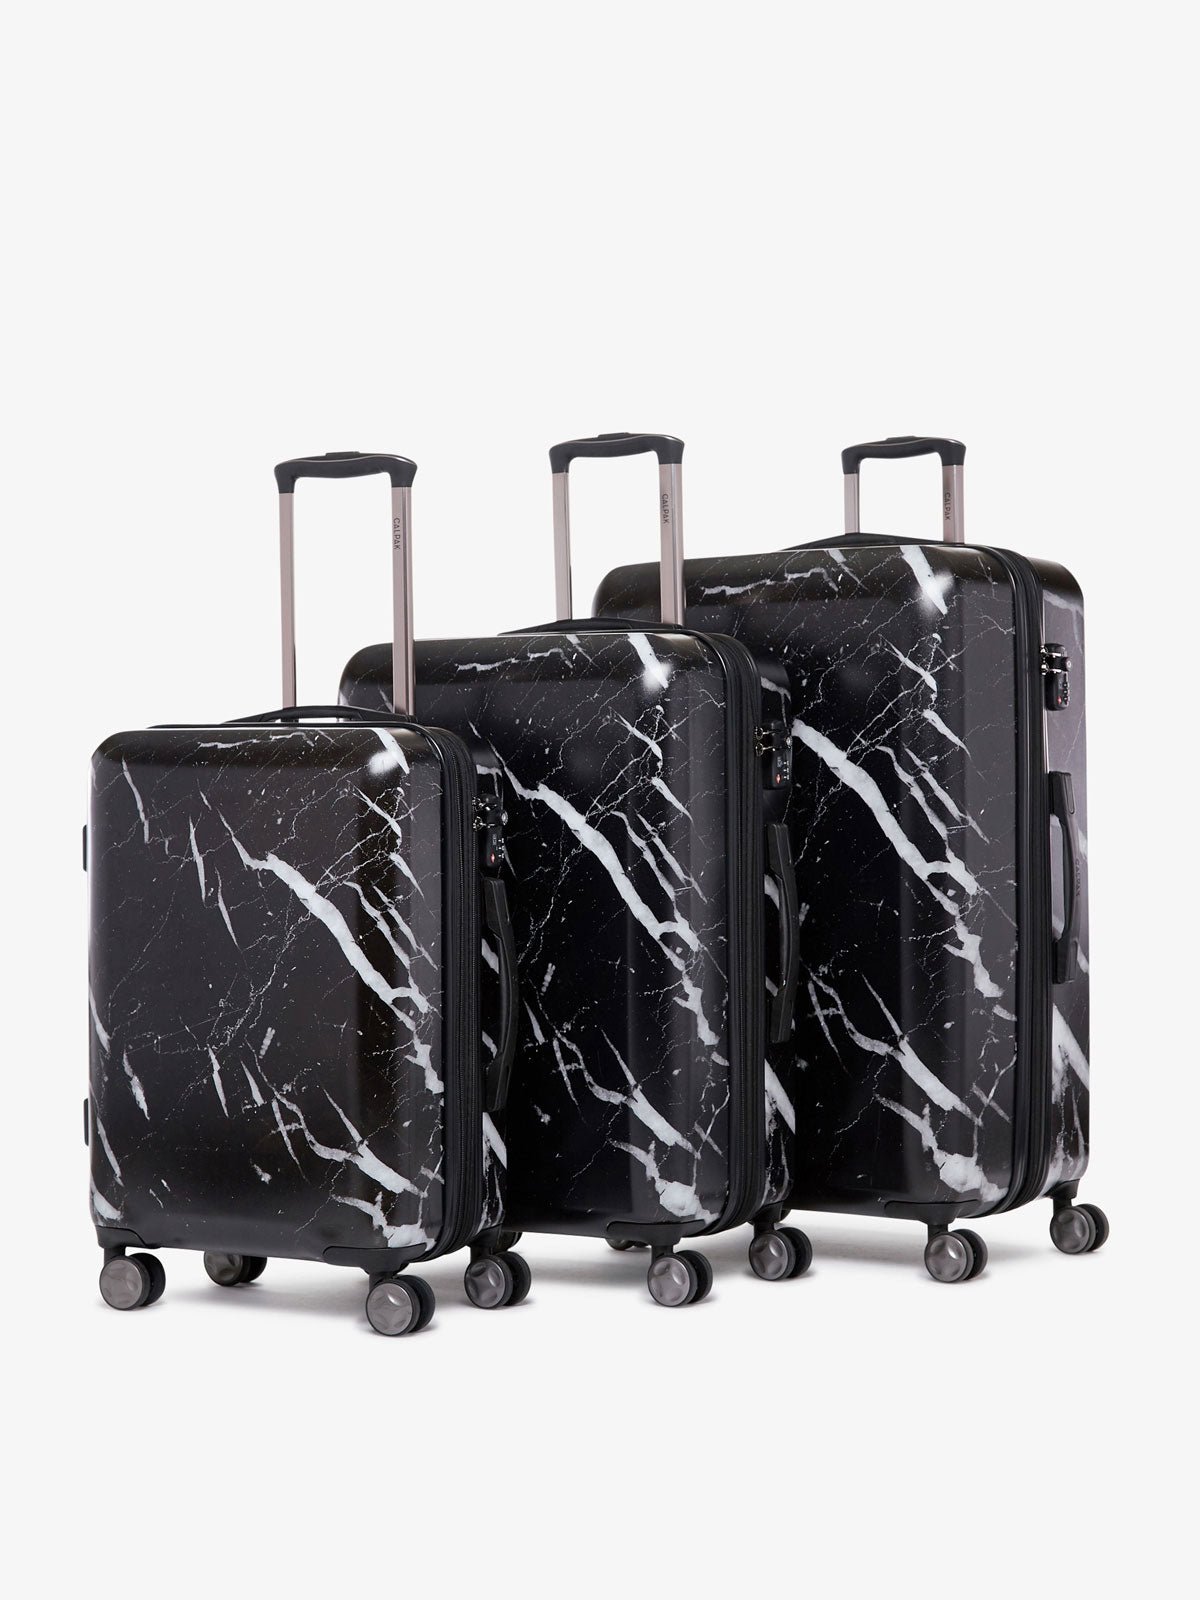 CALPAK Astyll black marble hard shell rolling carry on suitcase as a part of 3 piece luggage set